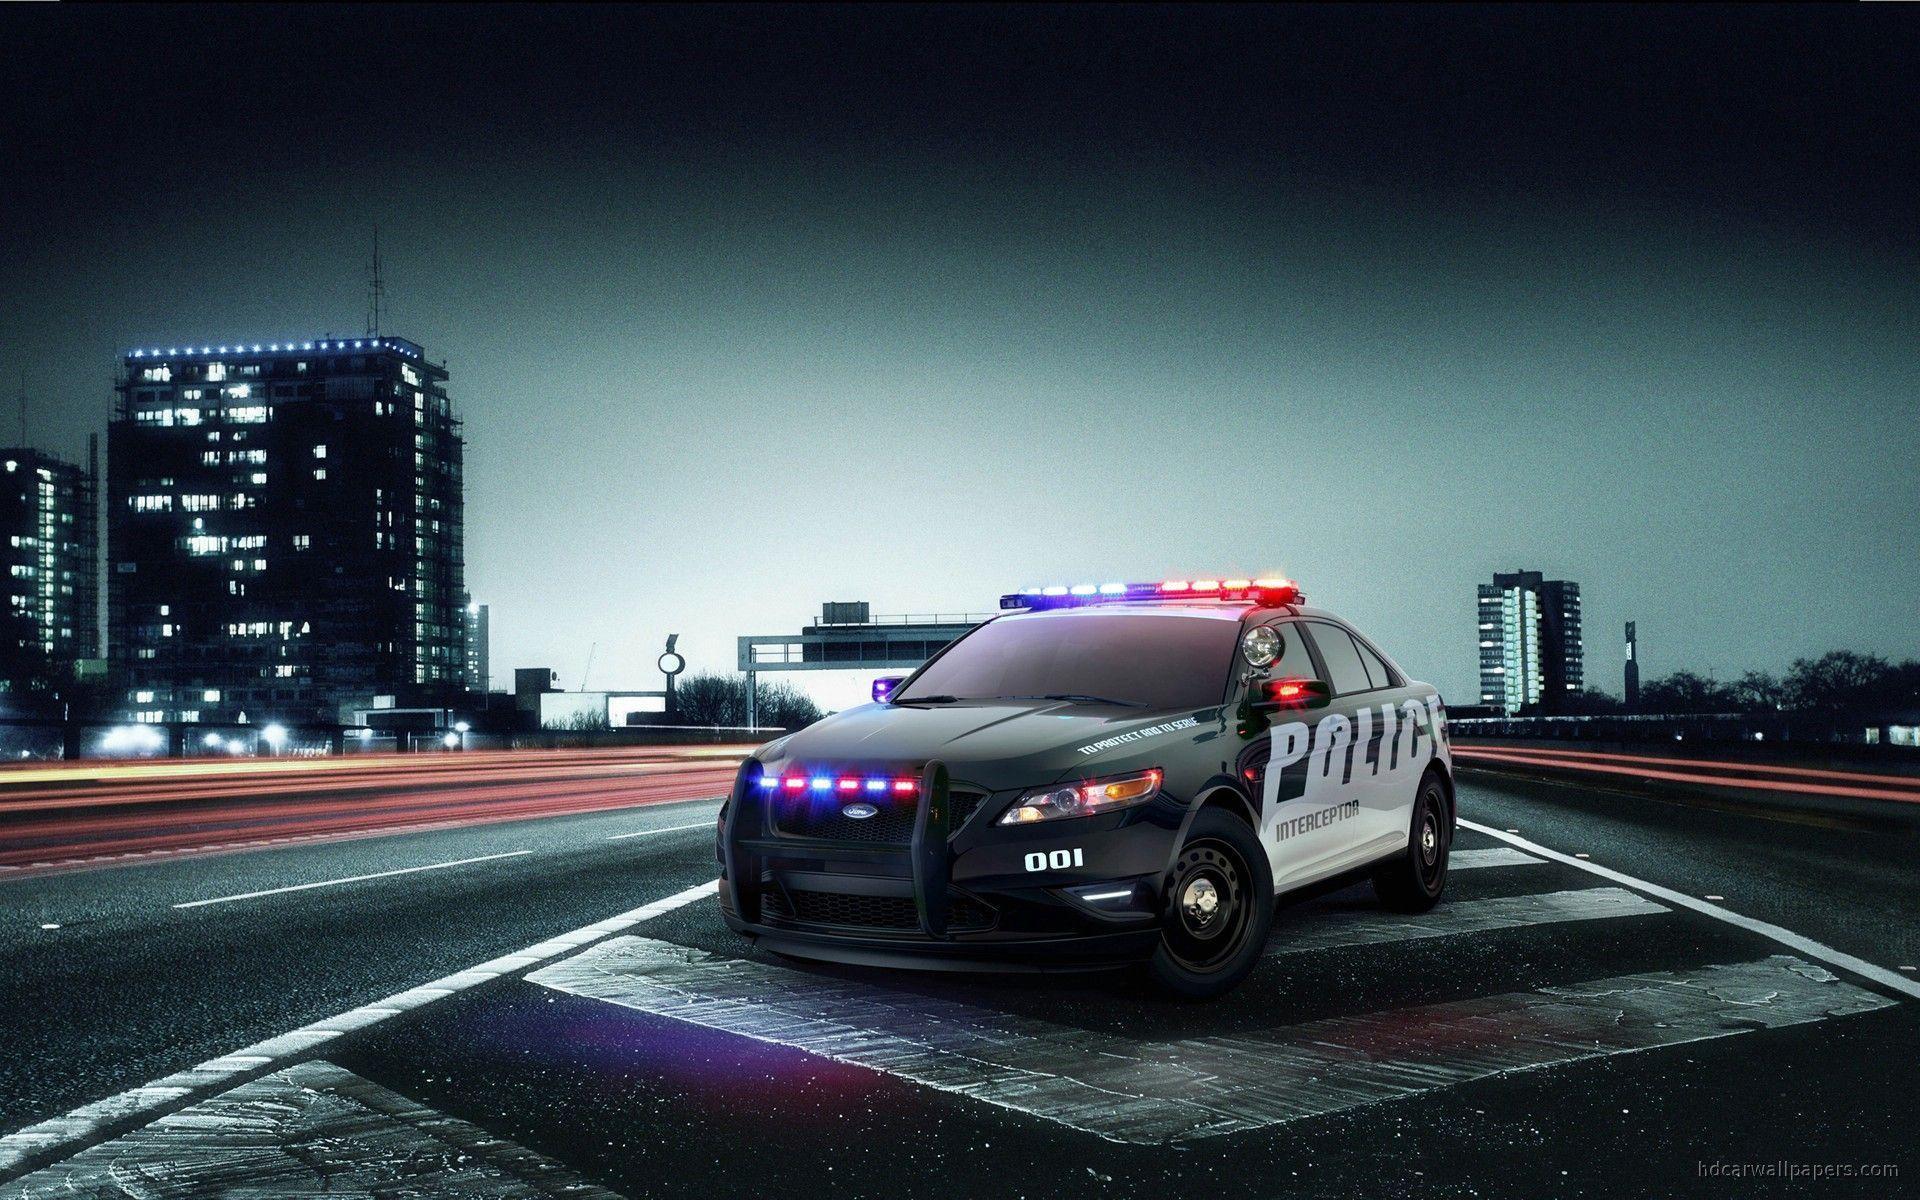 Wallpaper Tagged With POLICE. POLICE Car Wallpaper, Image